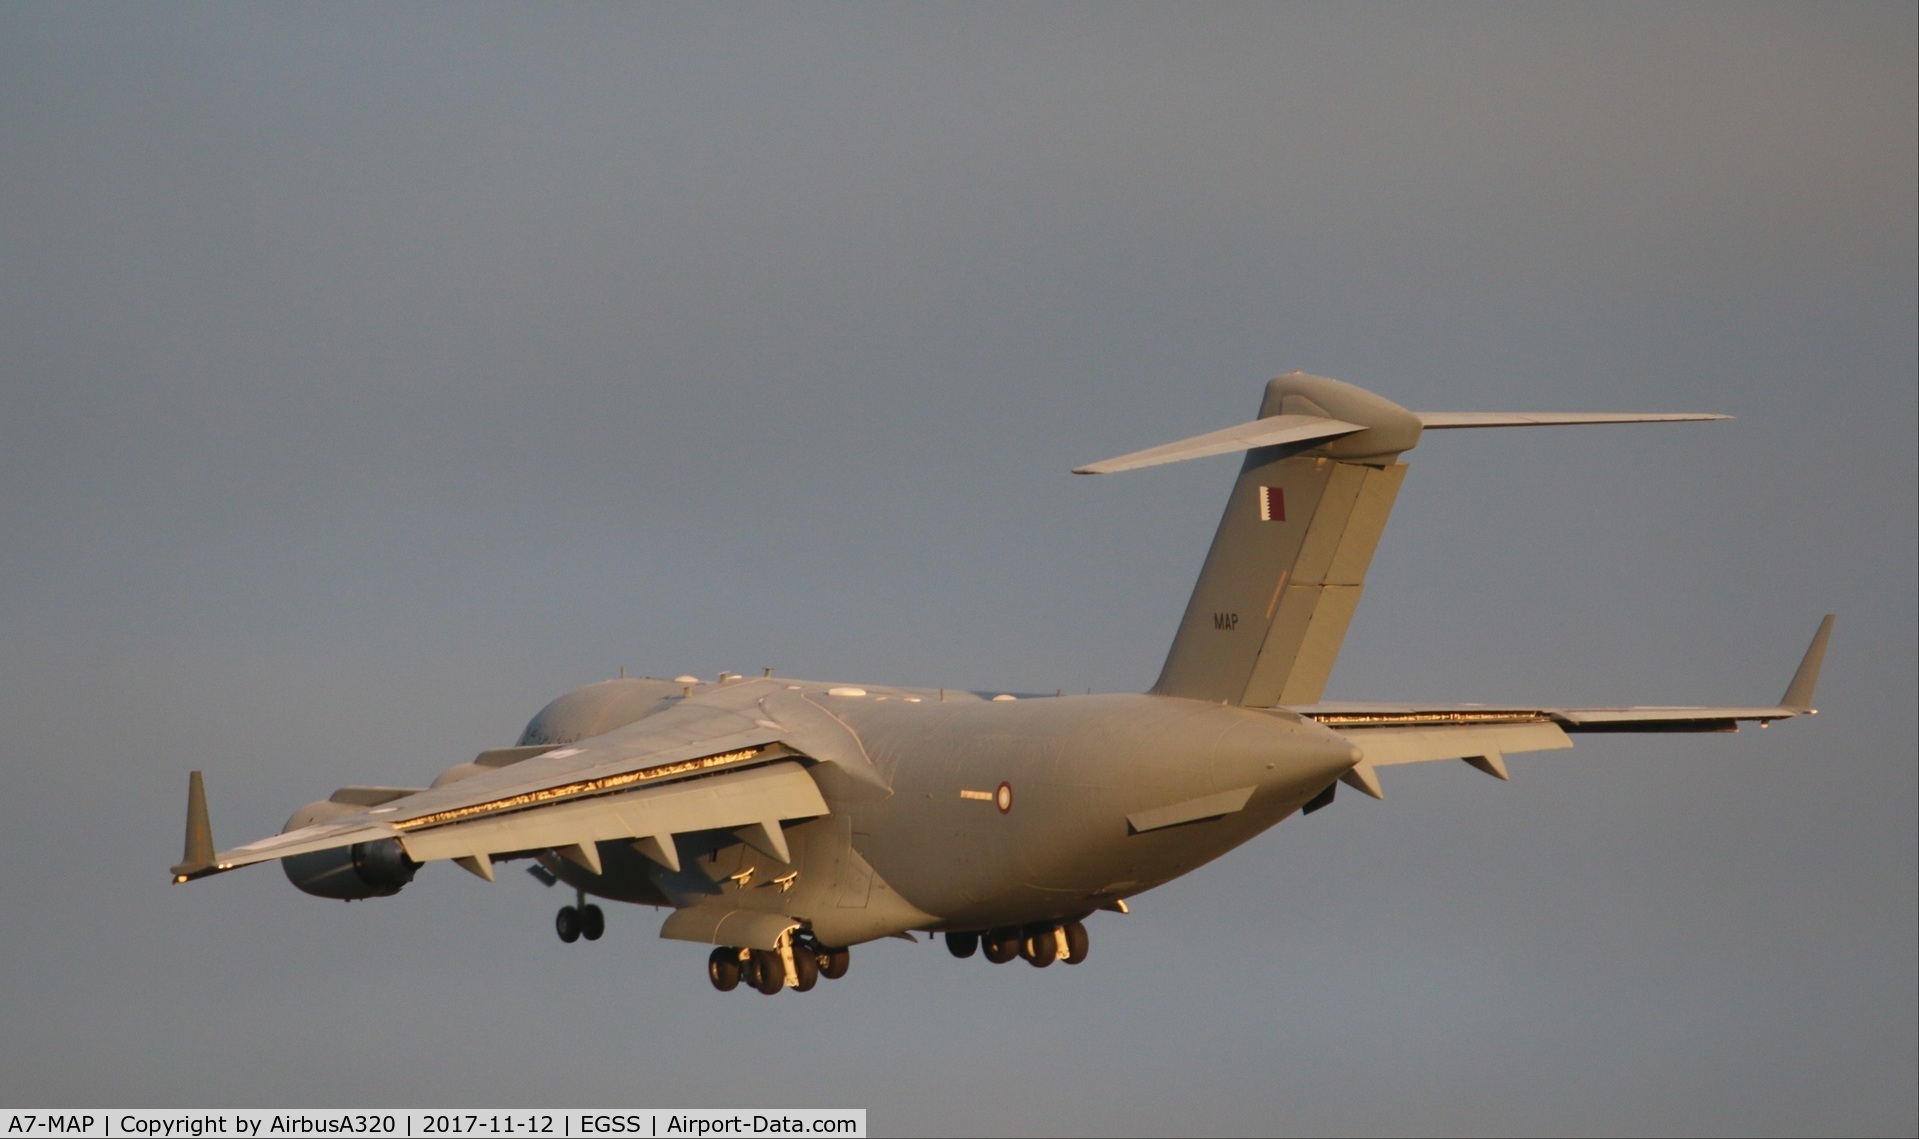 A7-MAP, 2016 Boeing C-17A Globemaster III C/N F-279, Coming into Land at London Stansted